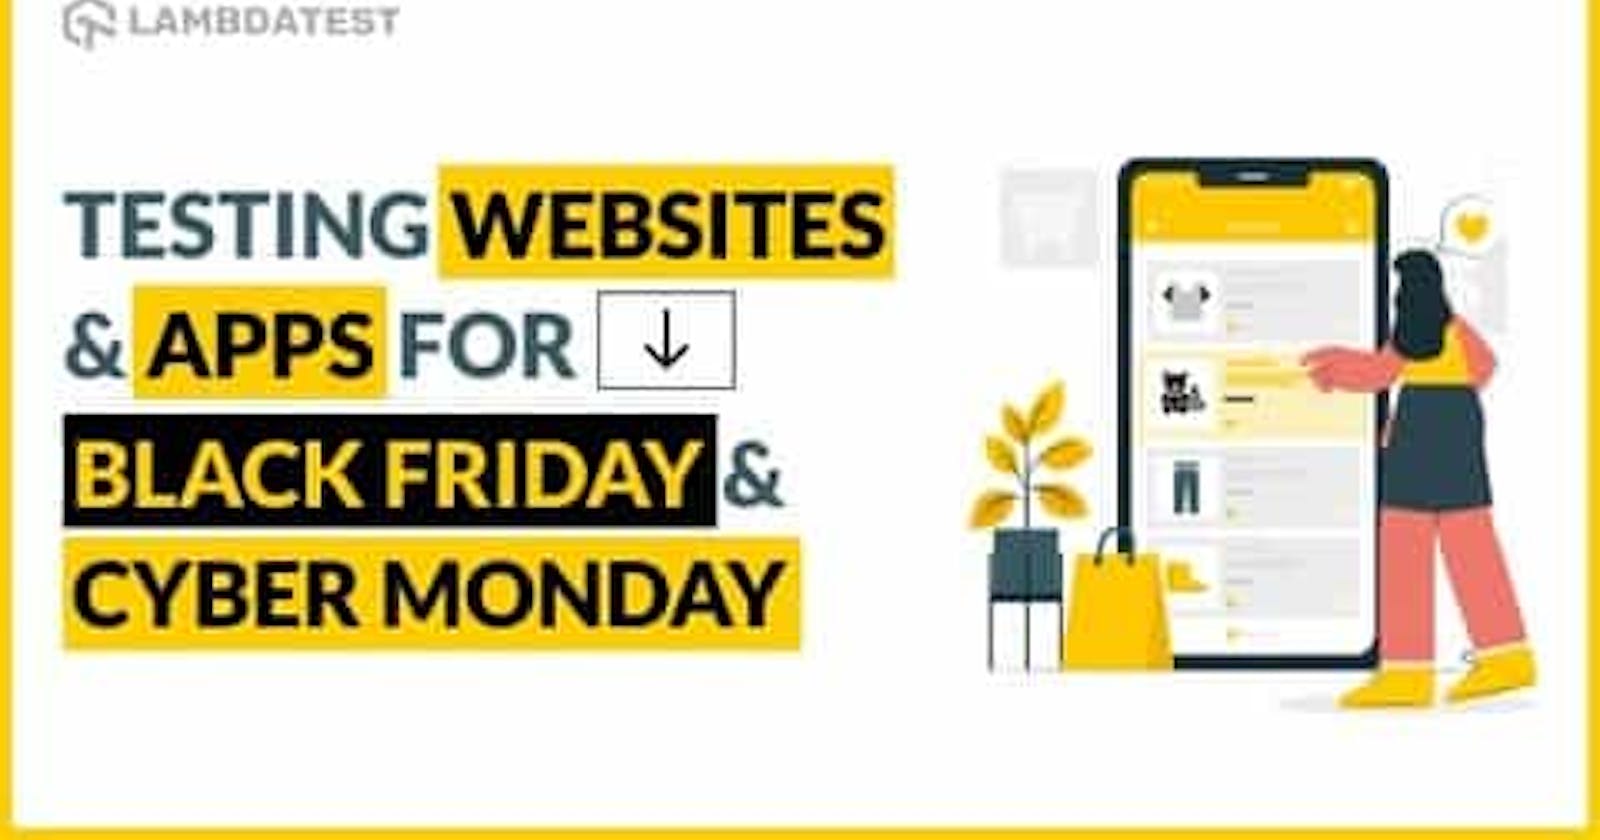 How To Test Websites And Apps For Black Friday And Cyber Monday